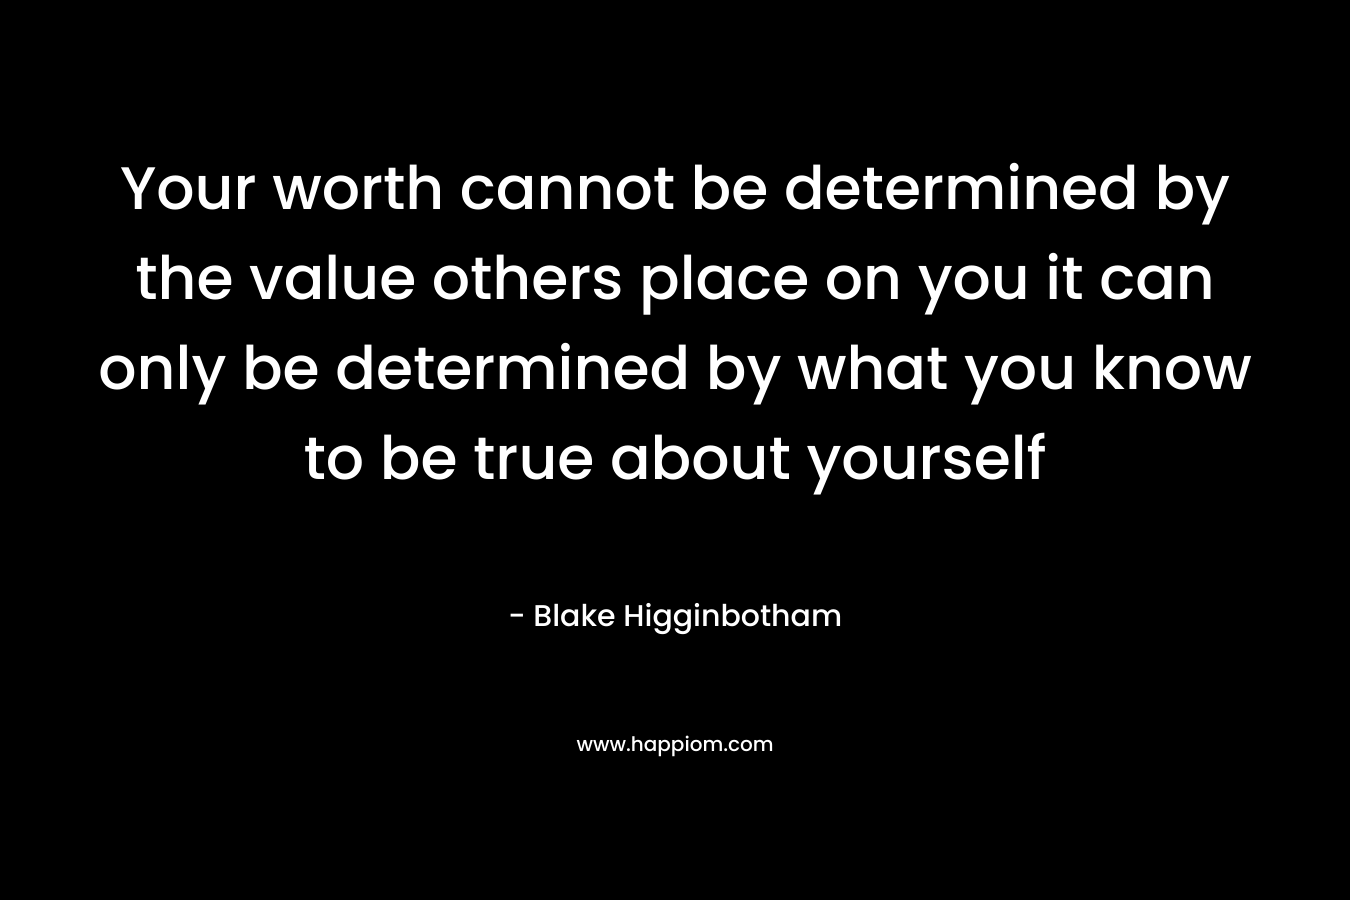 Your worth cannot be determined by the value others place on you it can only be determined by what you know to be true about yourself